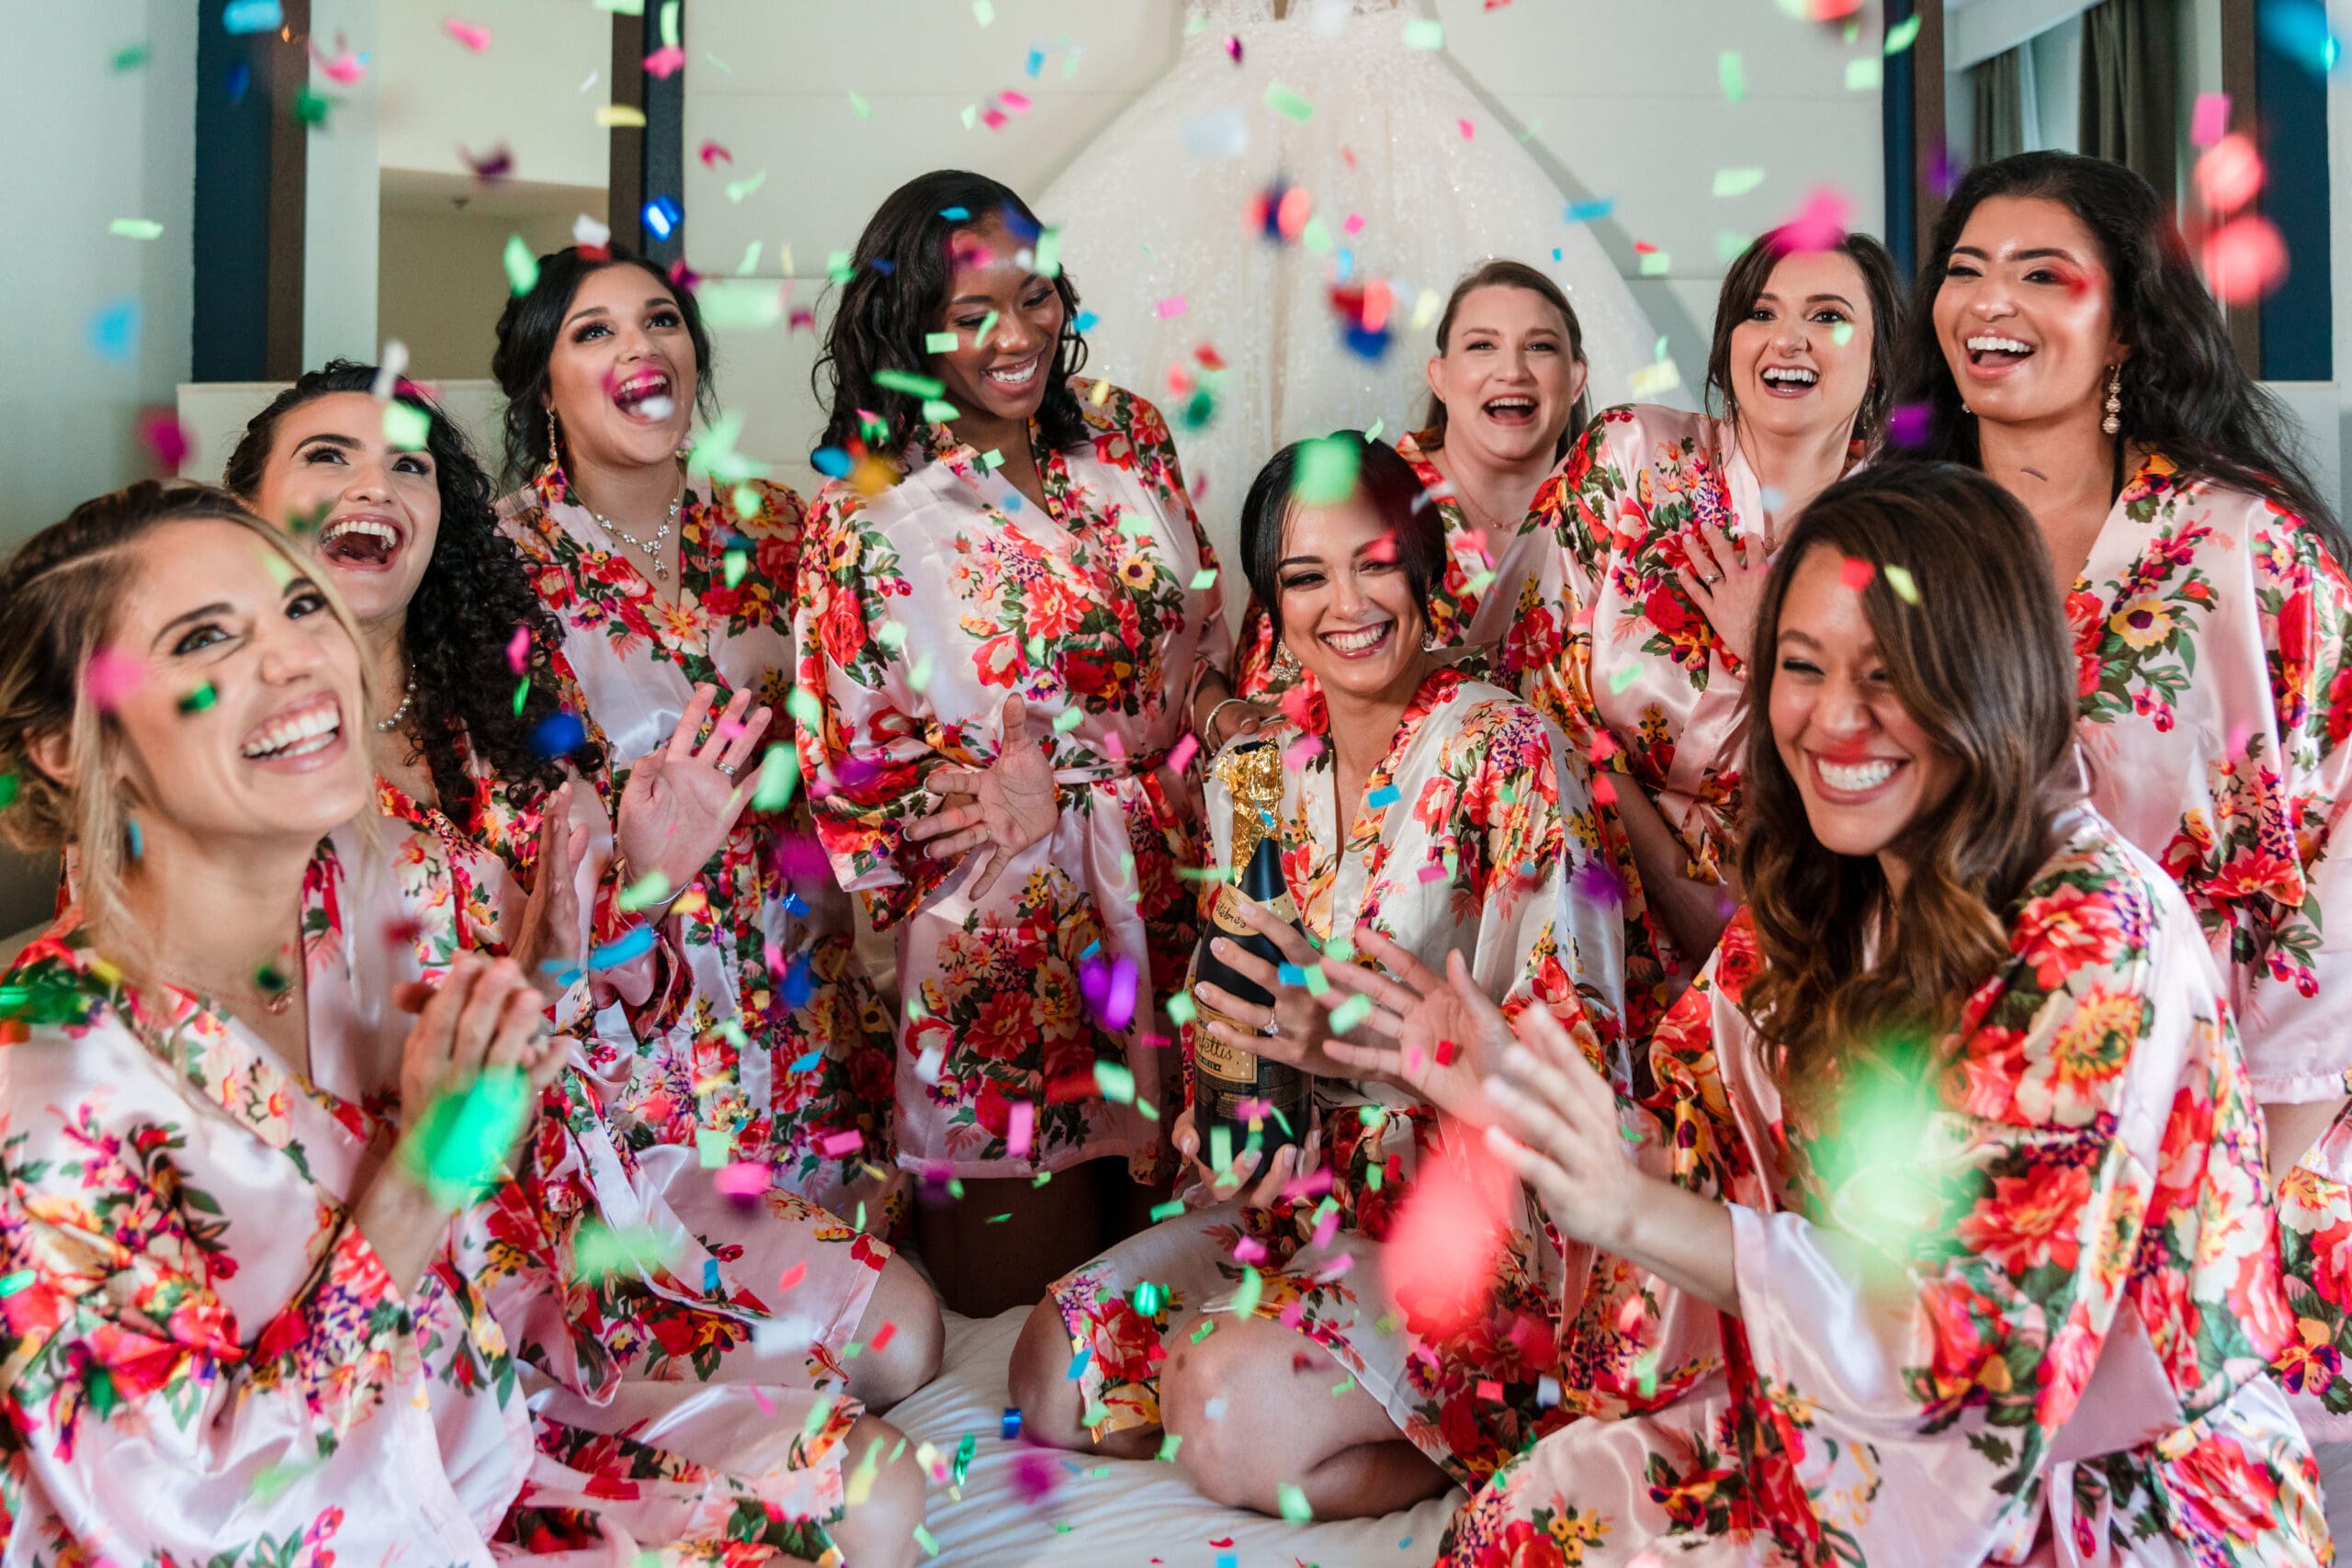 Jessica and her bridesmaids in matching flower print robes, sitting on the bed at Caribe Royale Orlando, with Jessica's wedding dress hanging in the background. Confetti and champagne bottles are seen around them.